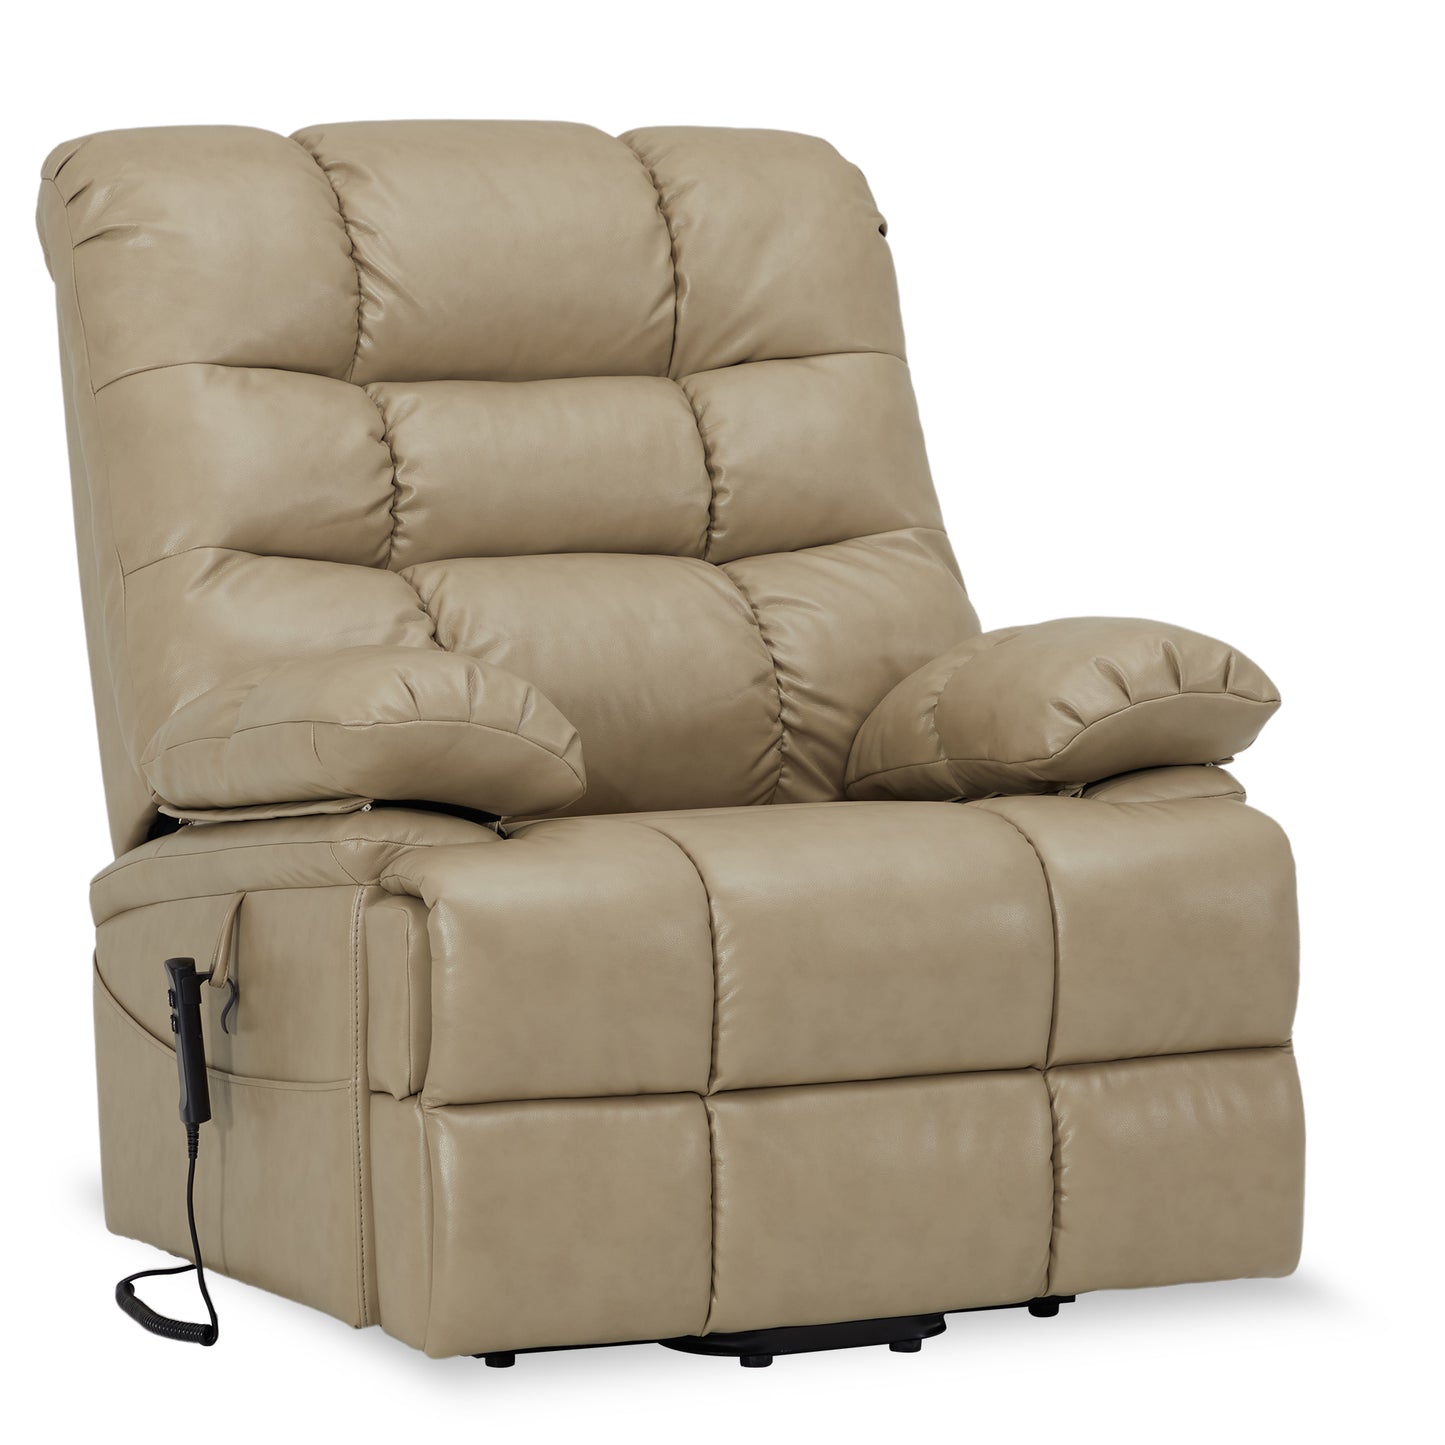 Heavy Duty Recliners 400 Lbs  With Heat Massage and Infinite Position